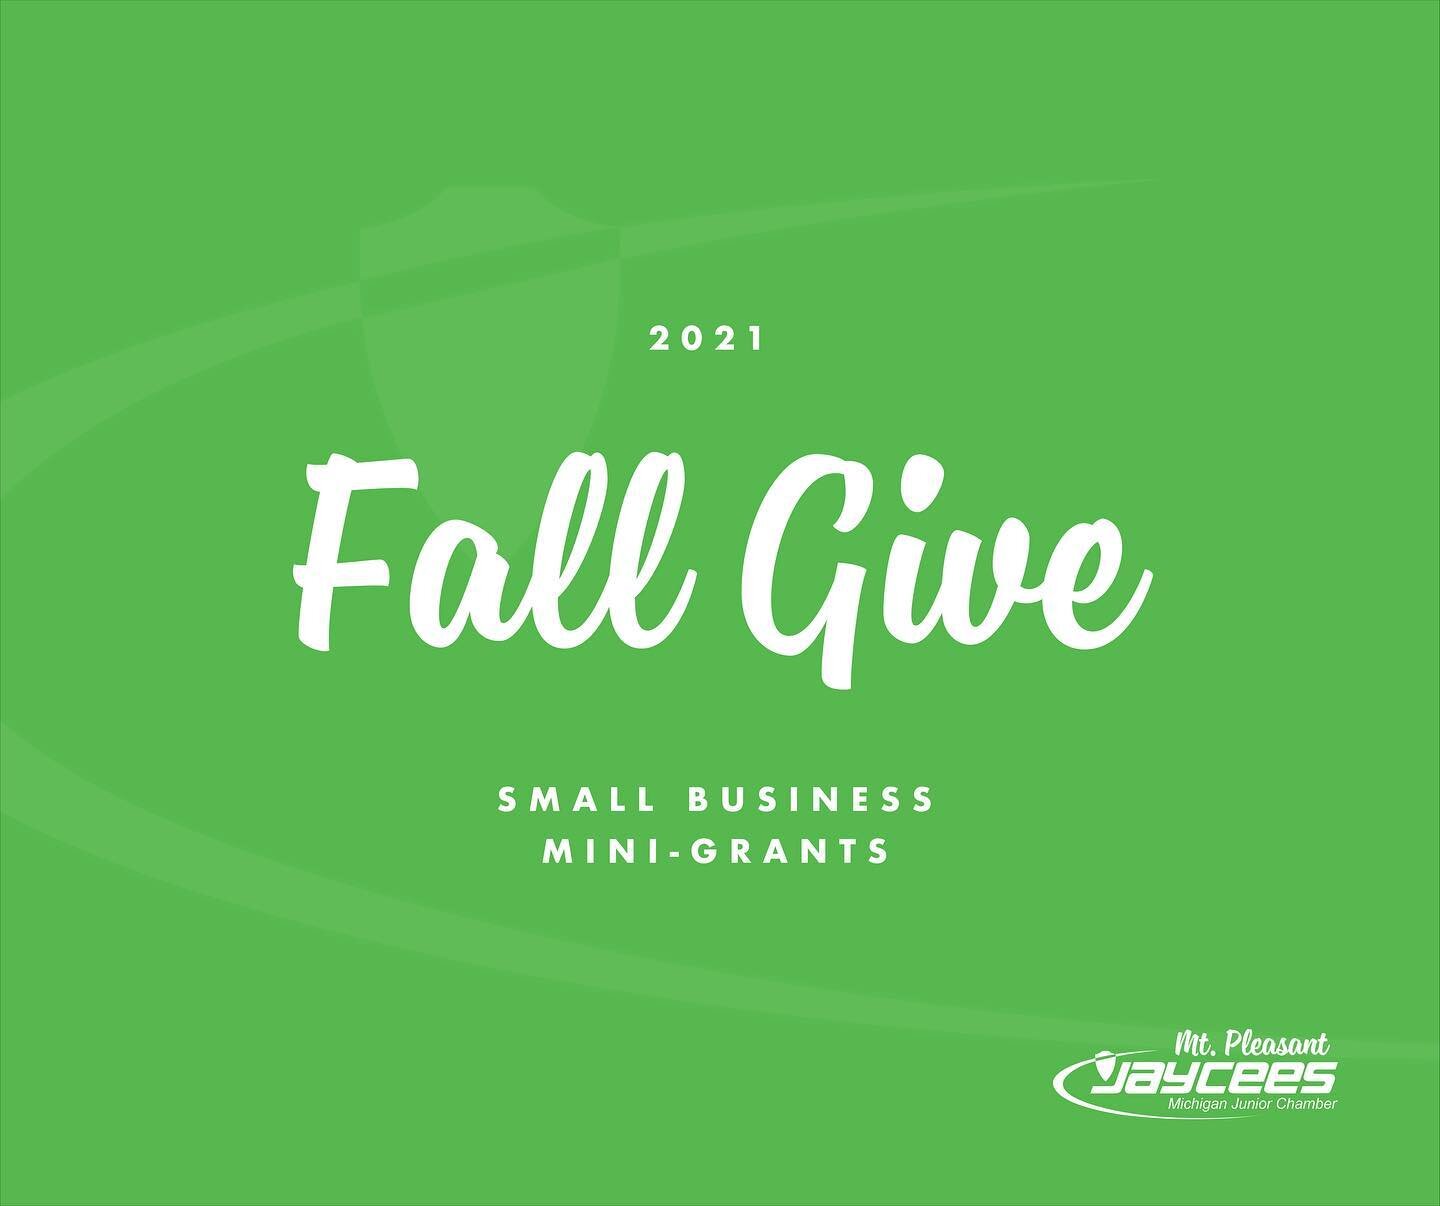 We're excited to share with you that our 2021 Fall Give application is NOW OPEN! During this funding period, we're switching our focus and supporting our local businesses right here in Isabella County who've been hit hard by the ongoing pandemic.

Re